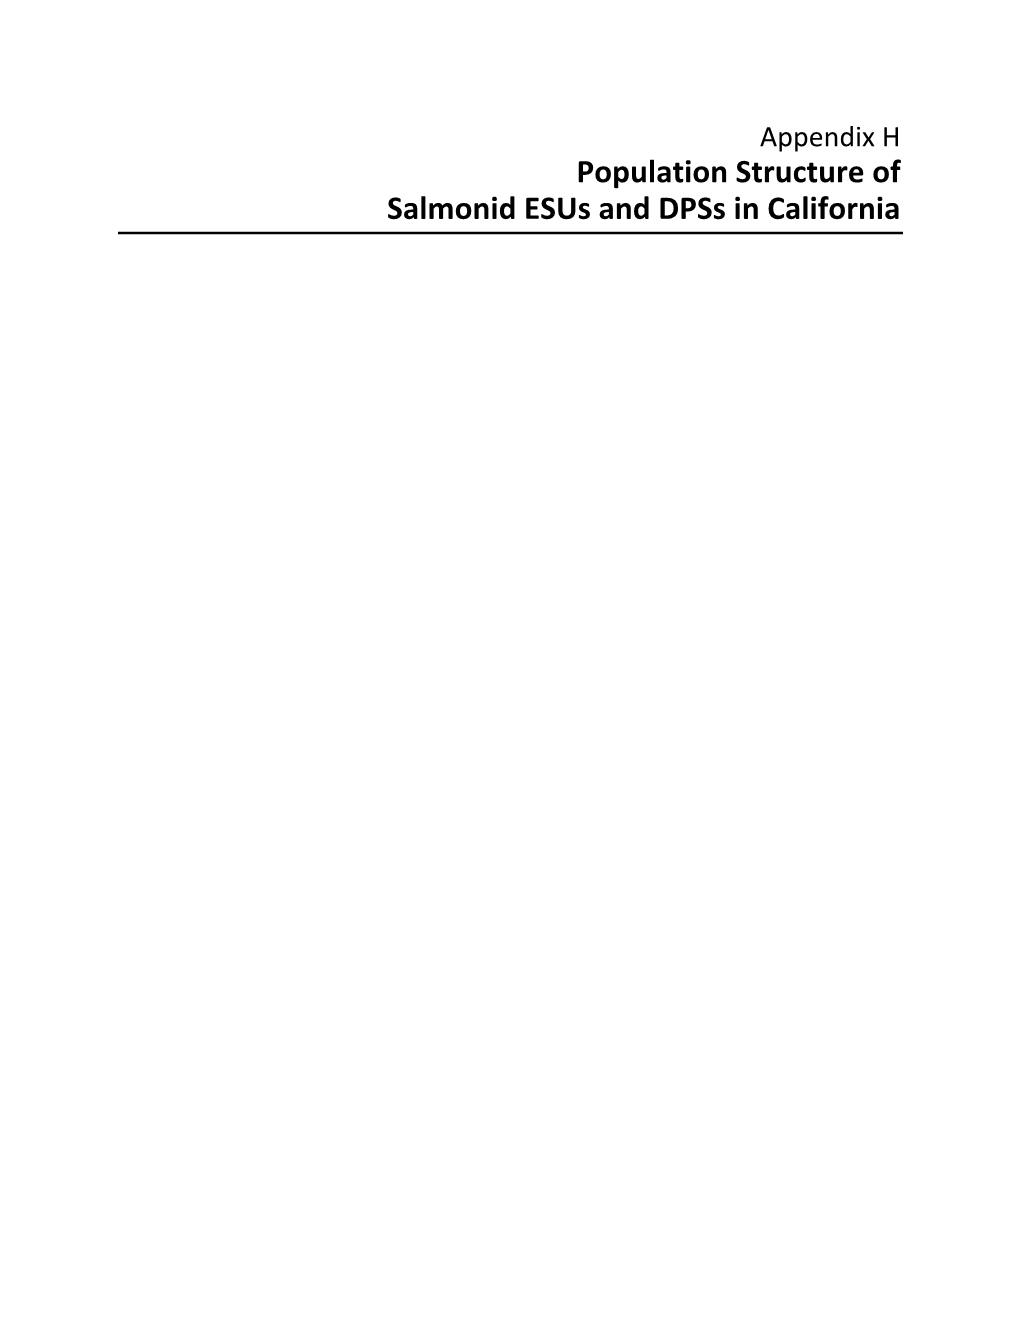 Population Structure of Salmonid Esus and Dpss in California